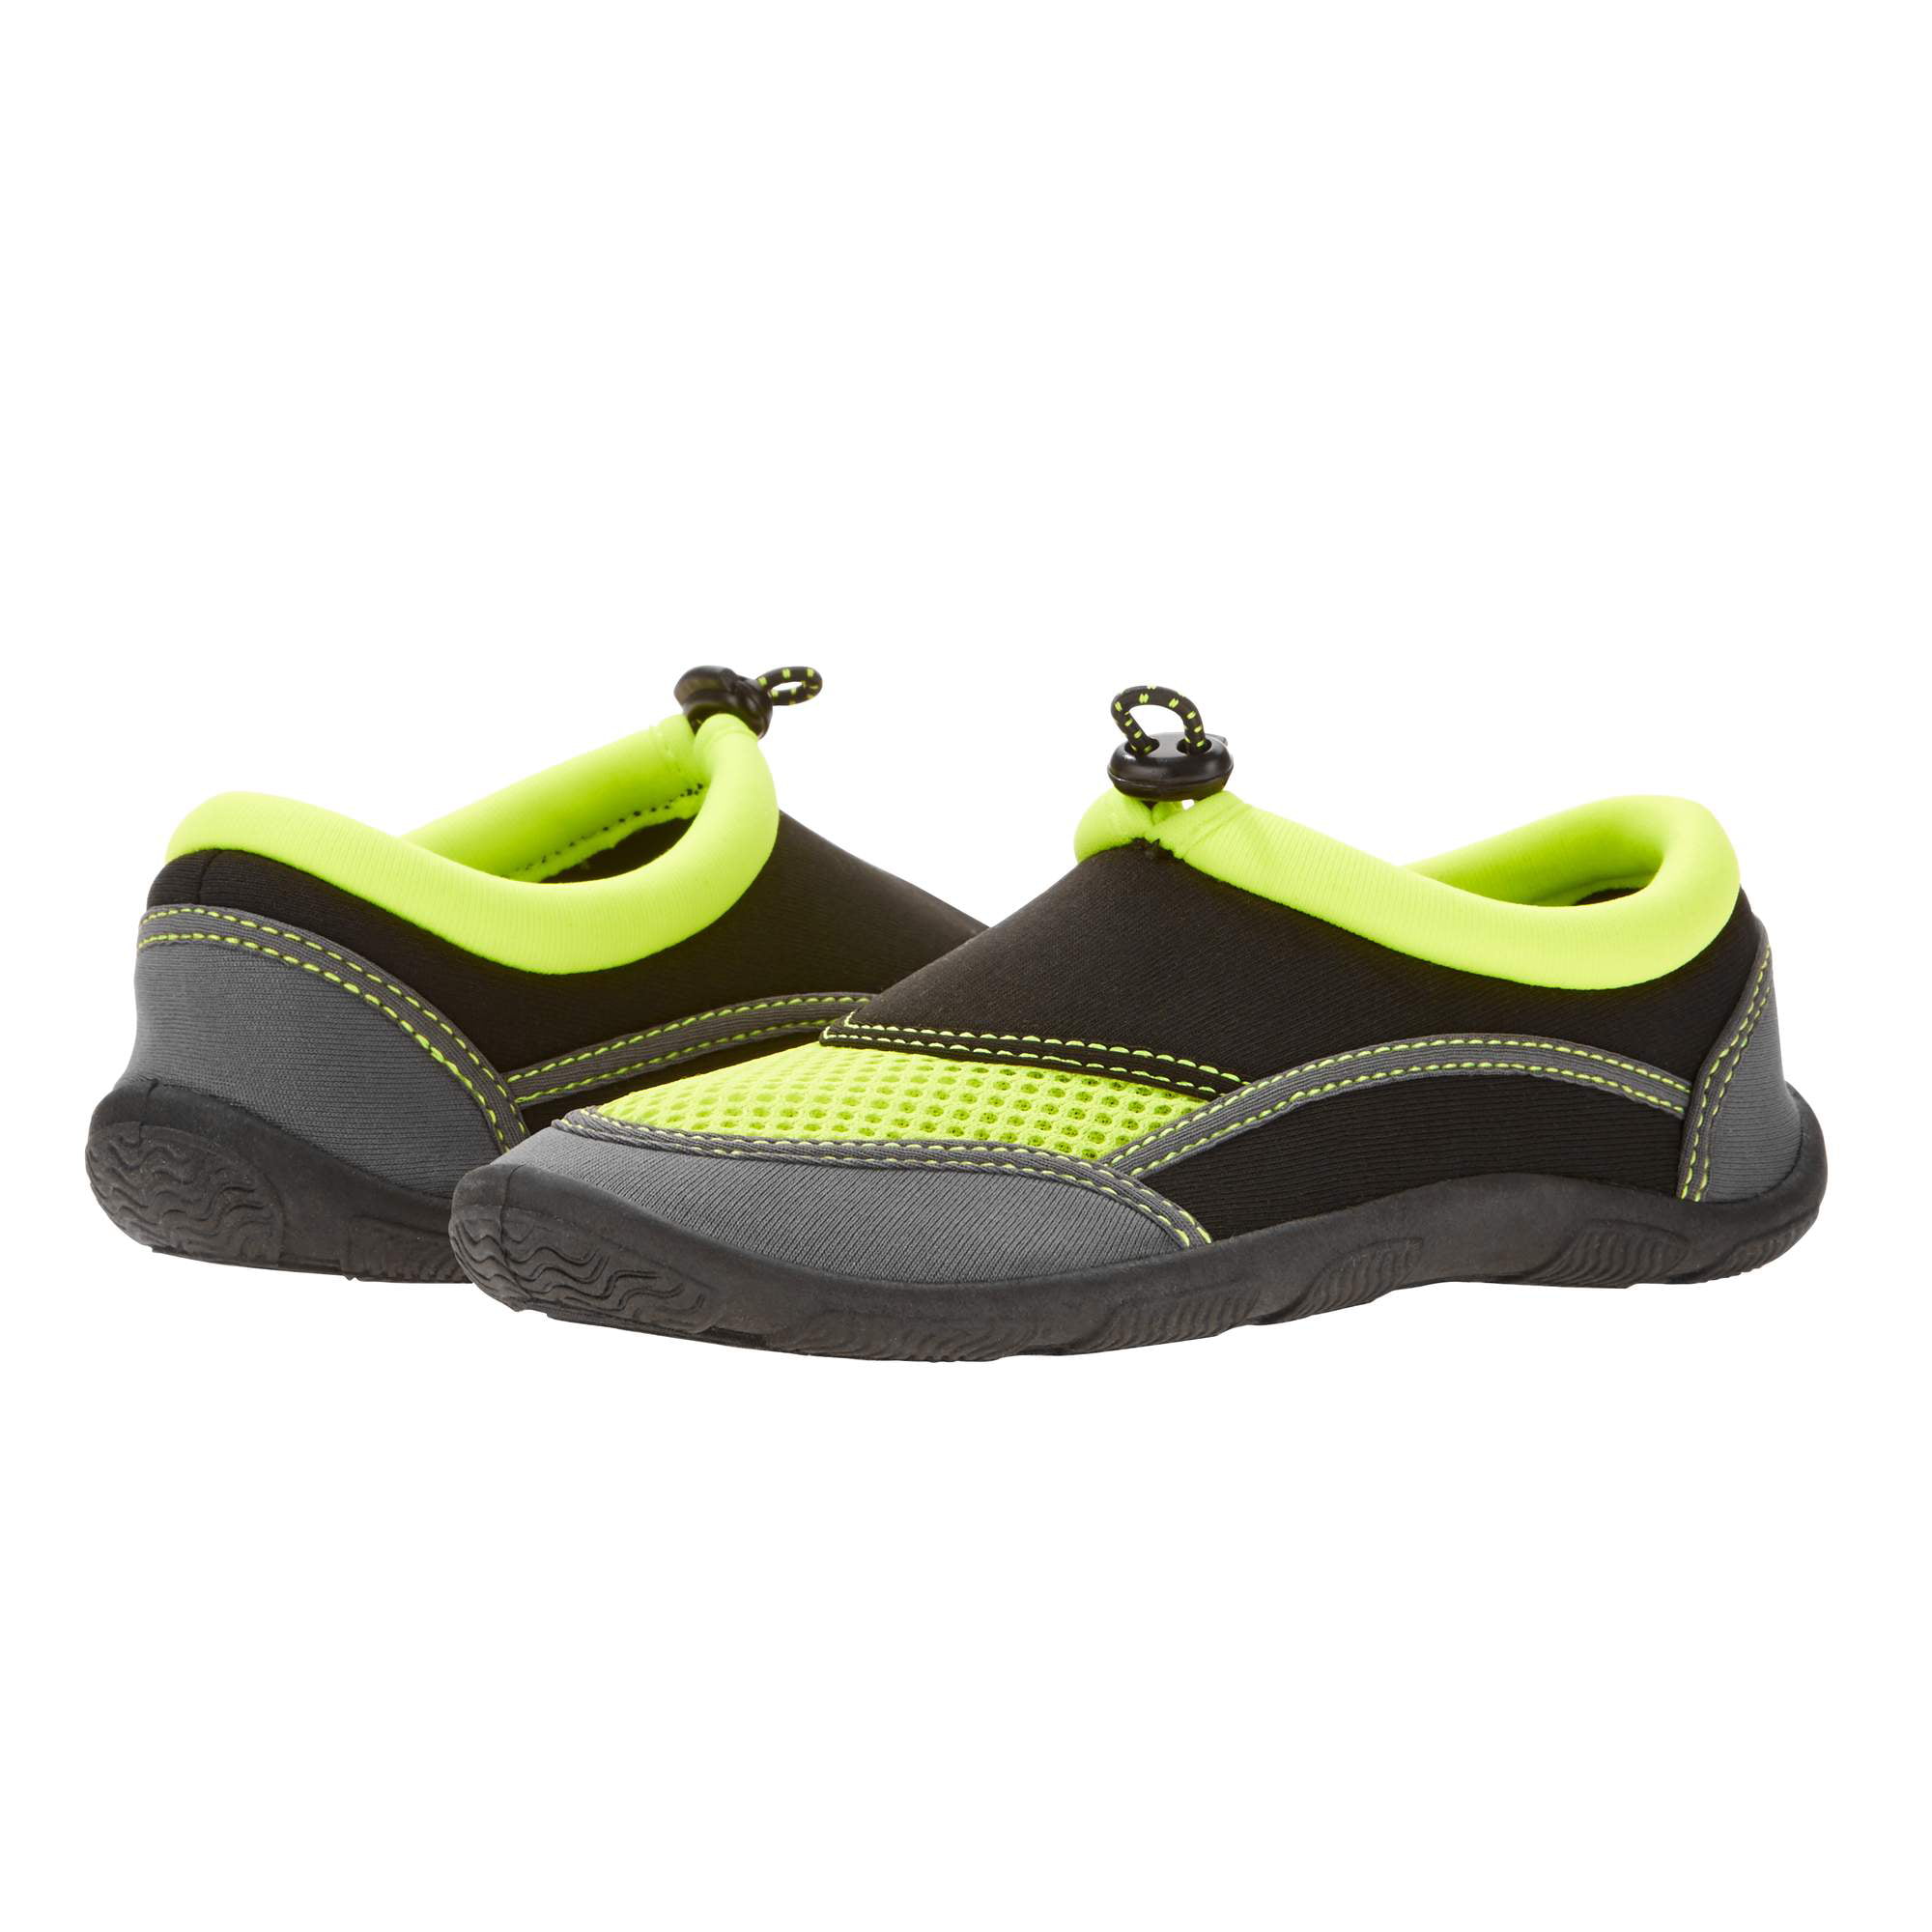 walmart water shoes in store